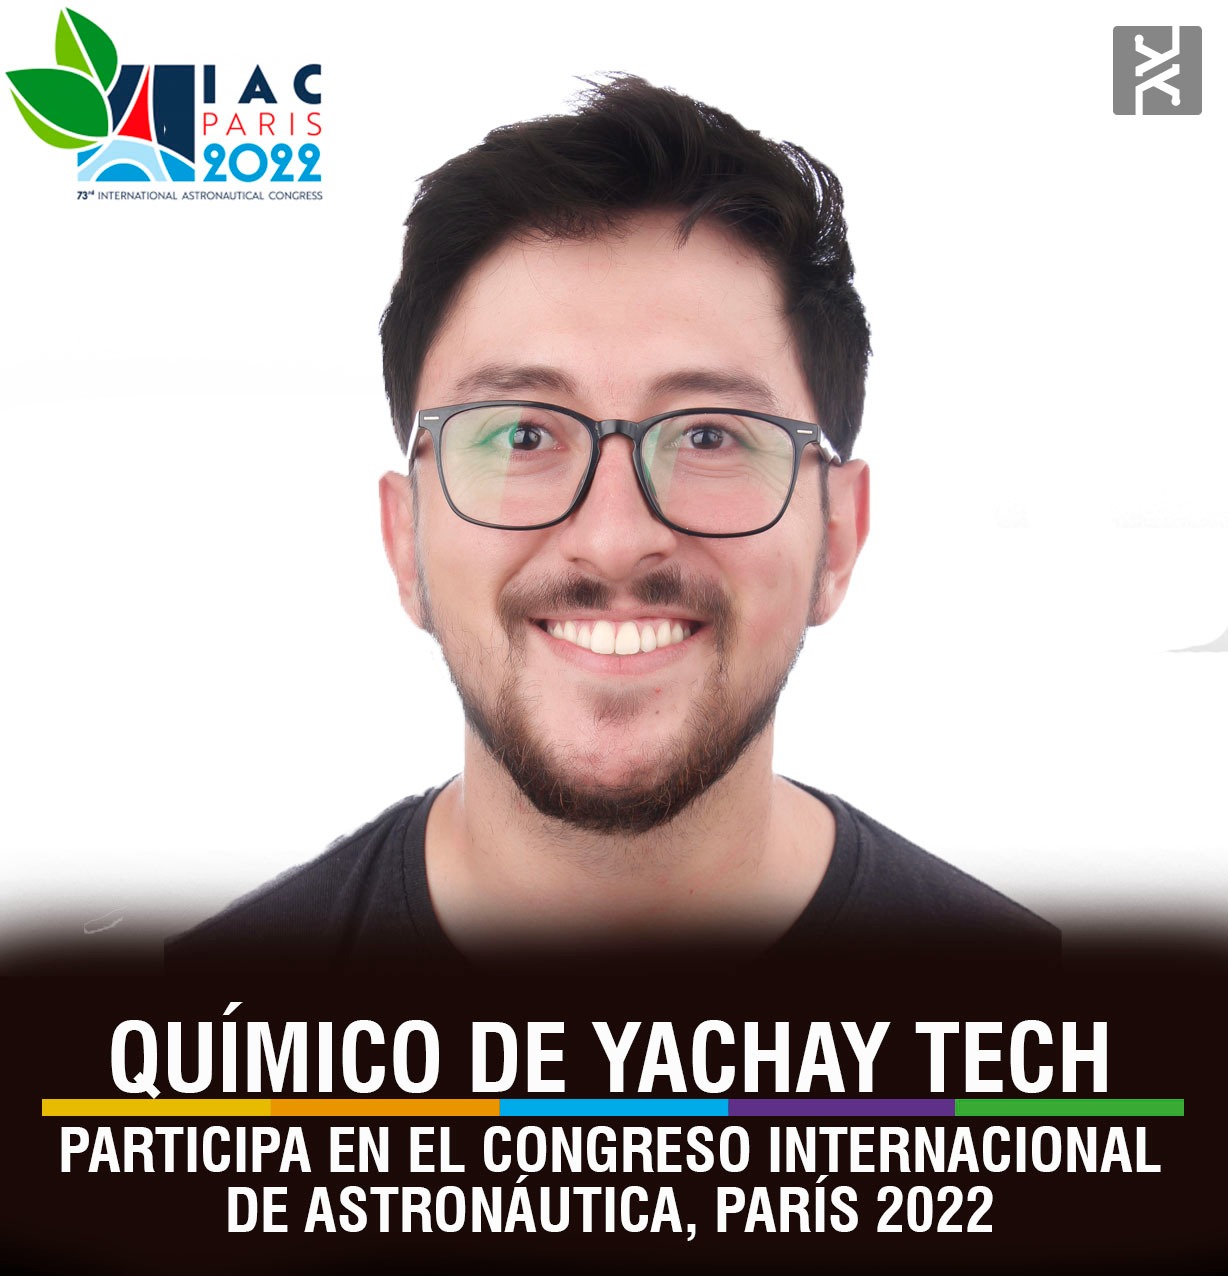 CHEMIST FROM YACHAY TECH PARTICIPATES IN THE INTERNATIONAL ASTRONAUTICAL CONGRESS, PARIS 2022